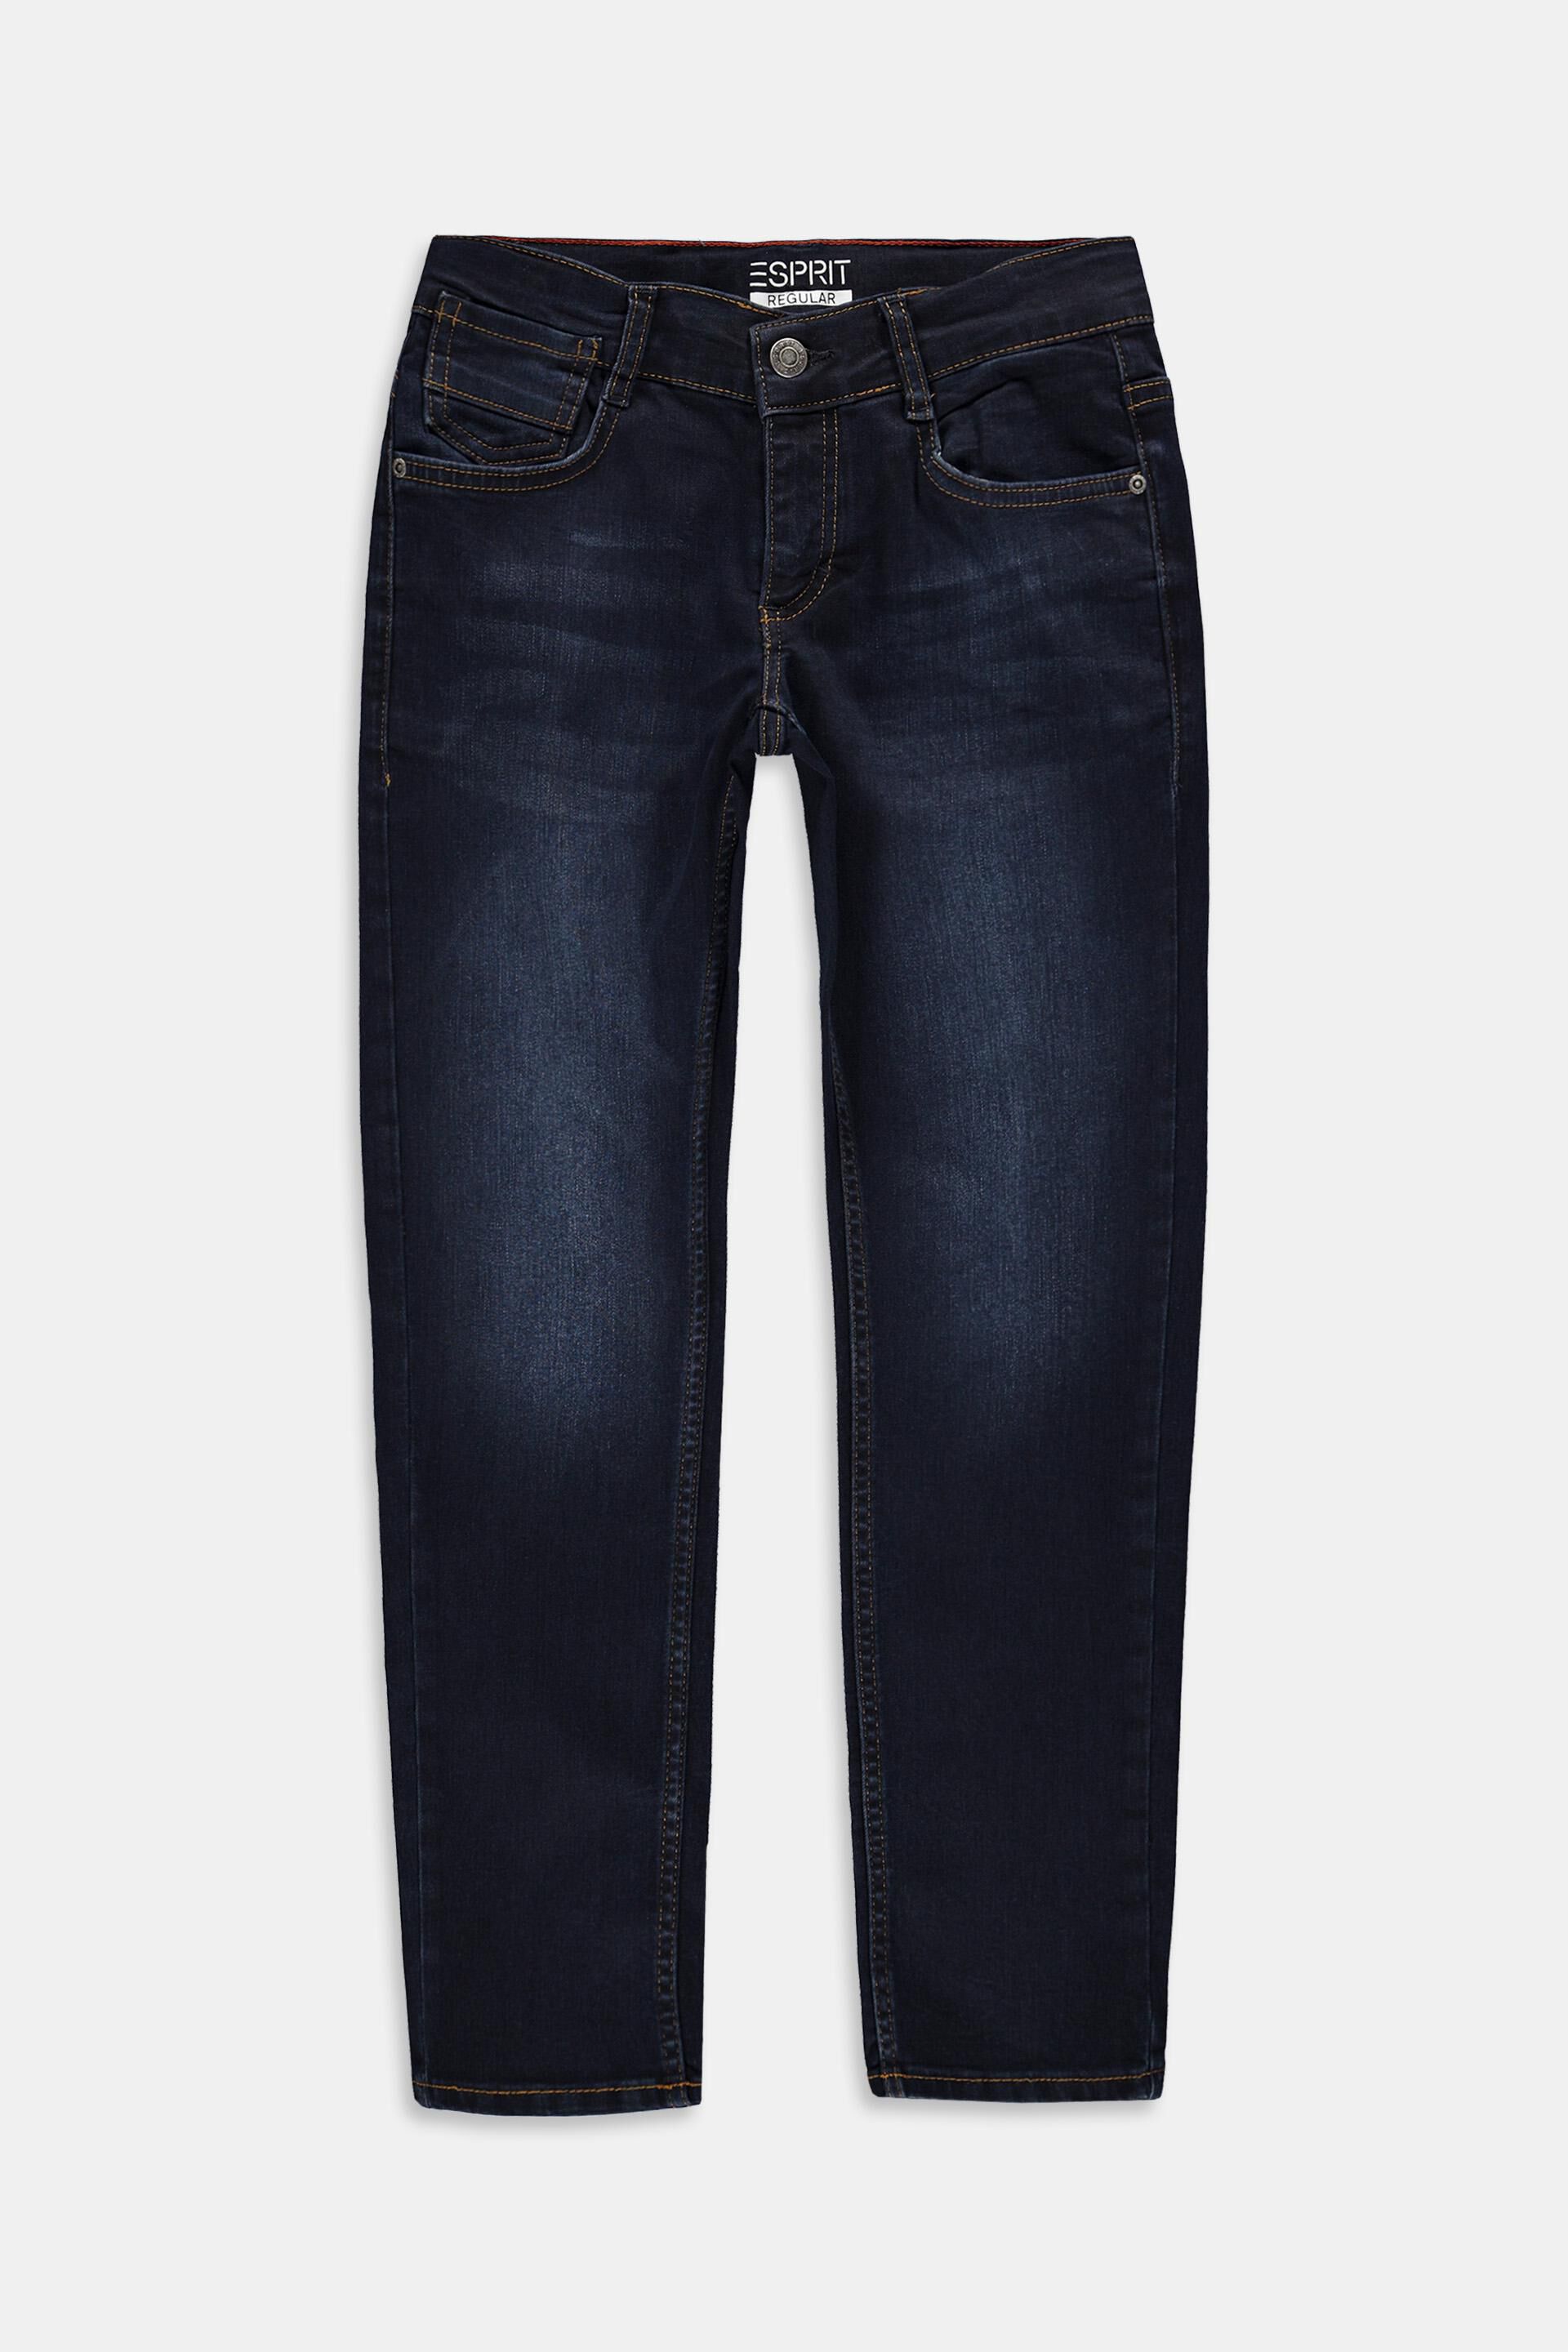 Esprit adjustable Jeans with waistband